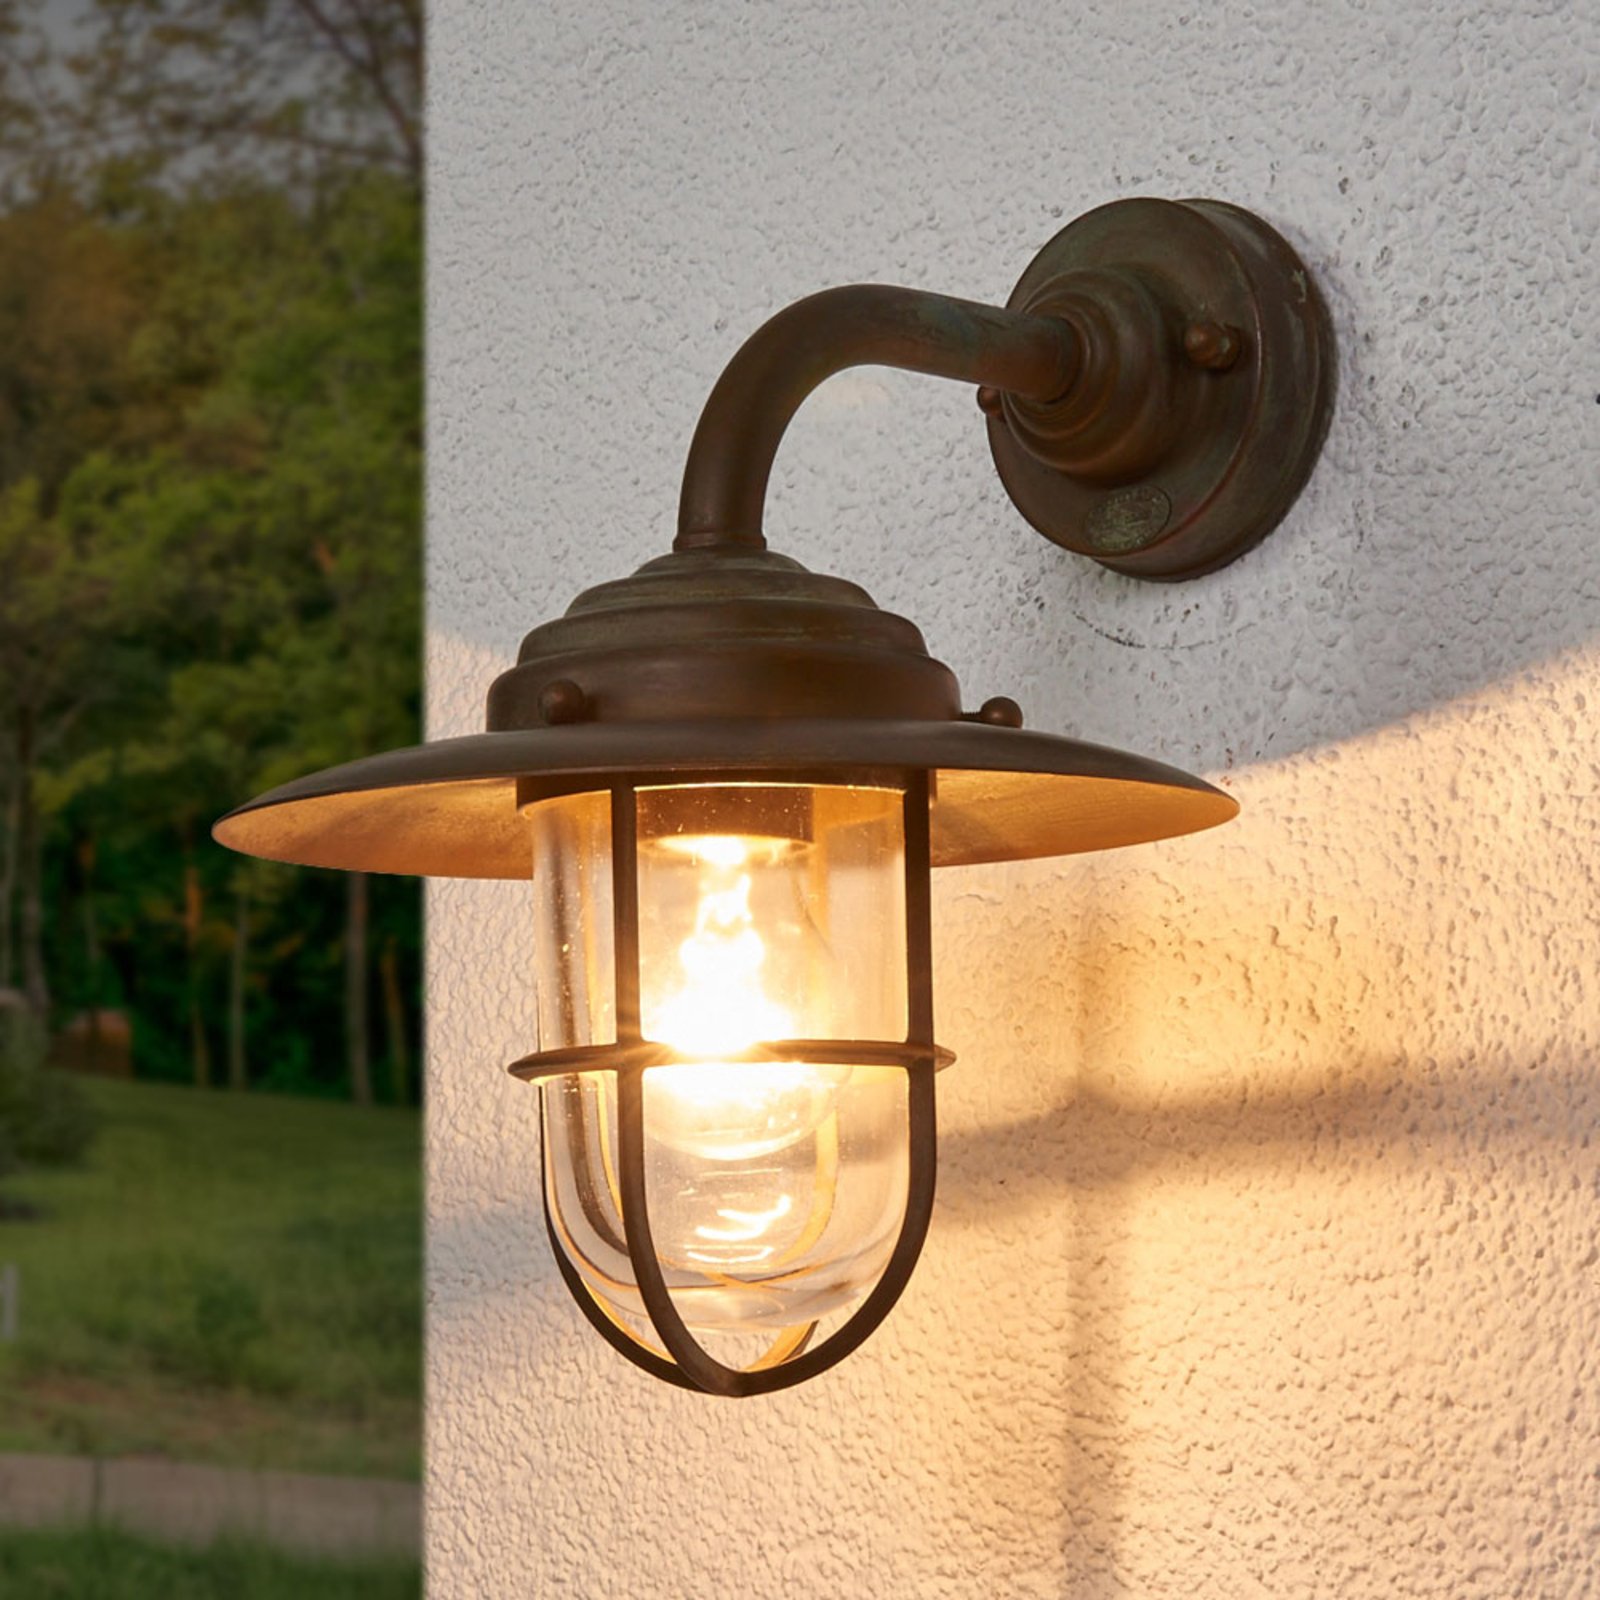 Stylish outdoor wall light Antique, clear glass